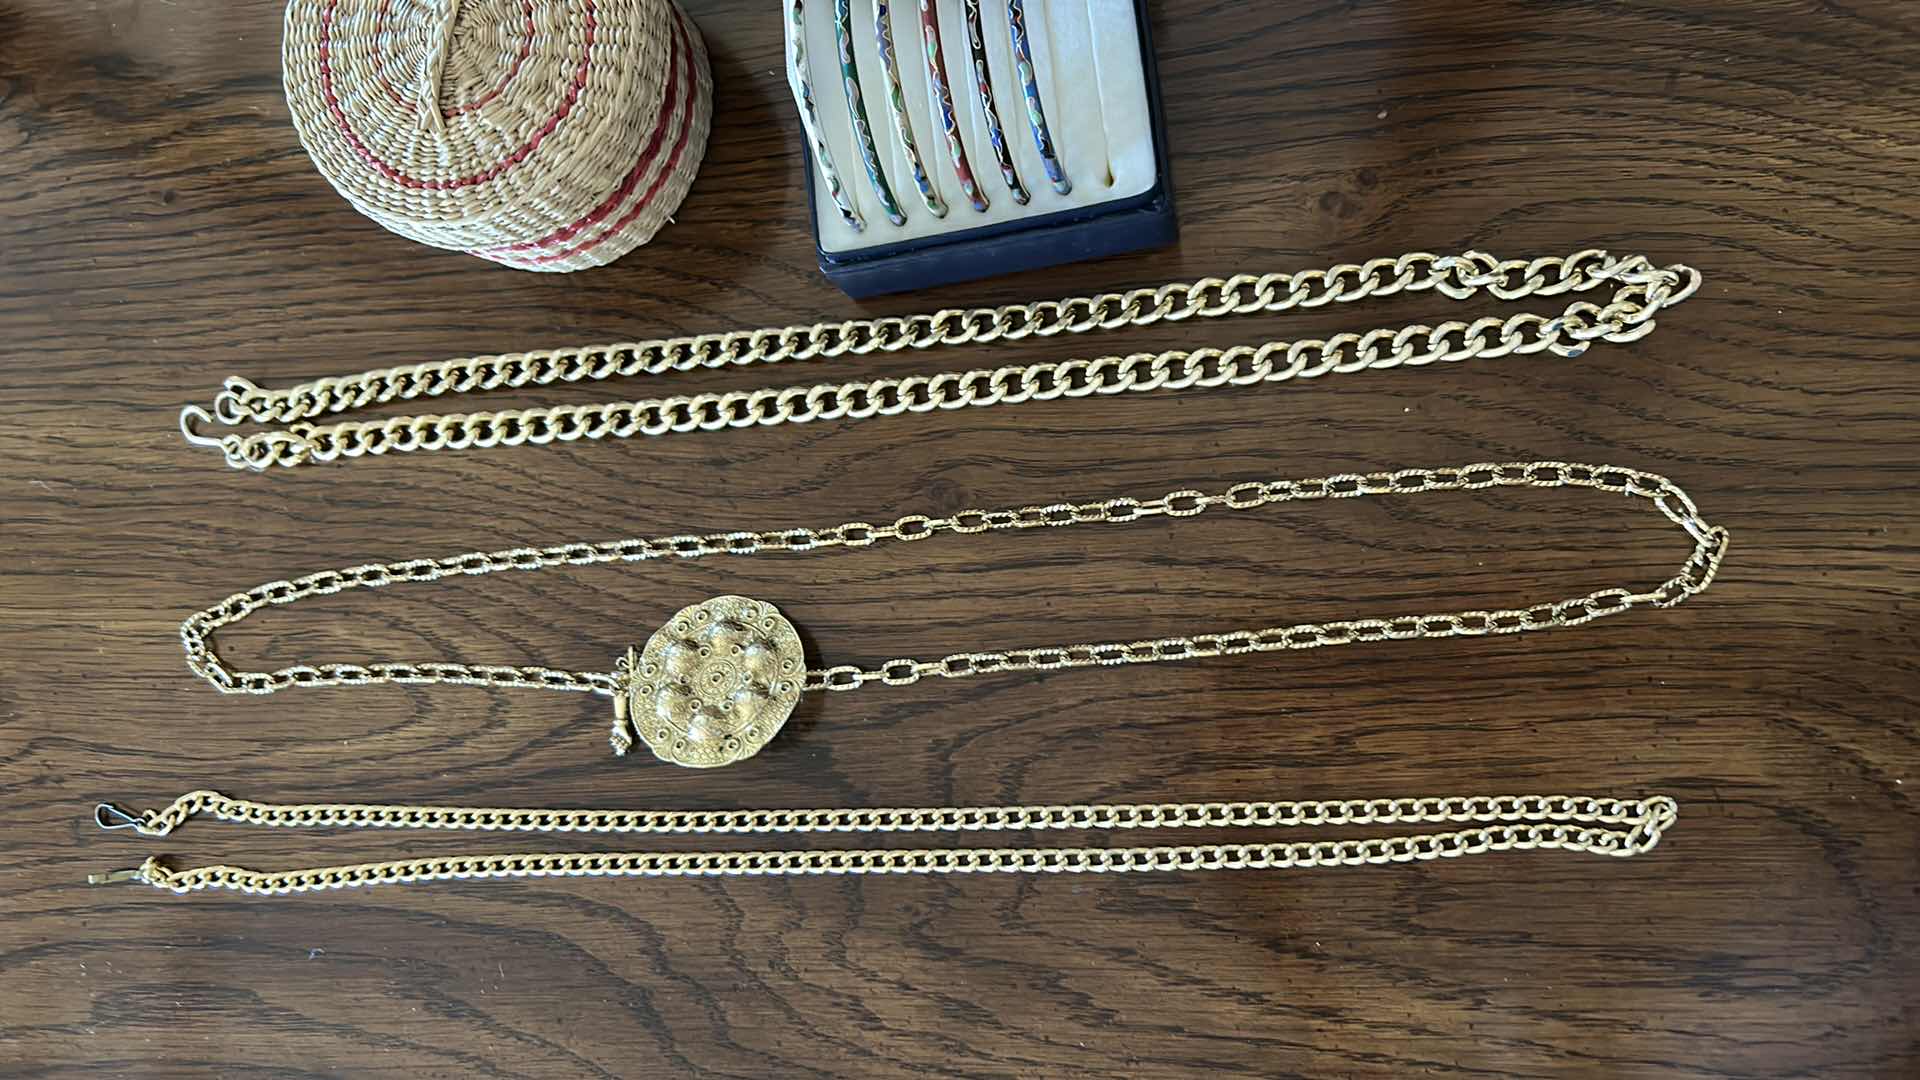 Photo 3 of Three gold chain belts, a collection of bracelets and wicker basket